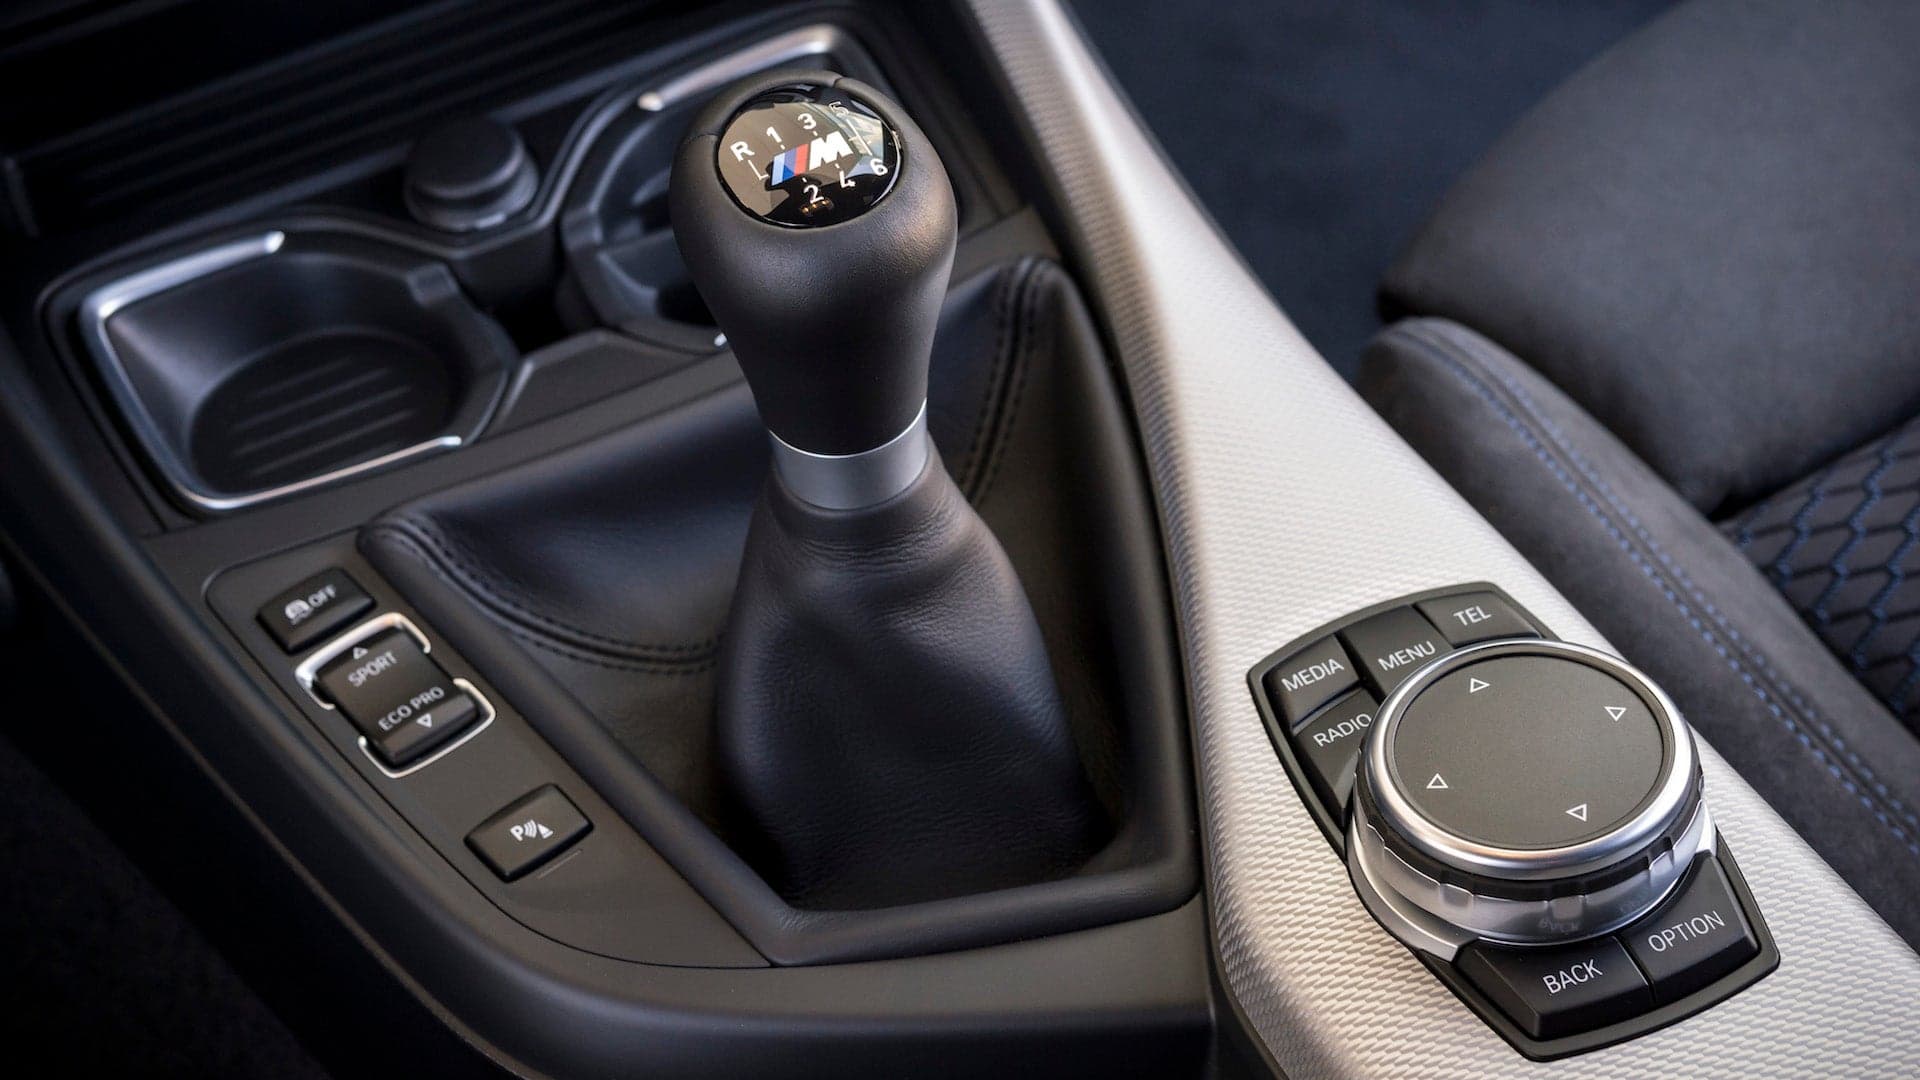 Manual Transmission Allegedly Stops Attempted Ohio Carjacking